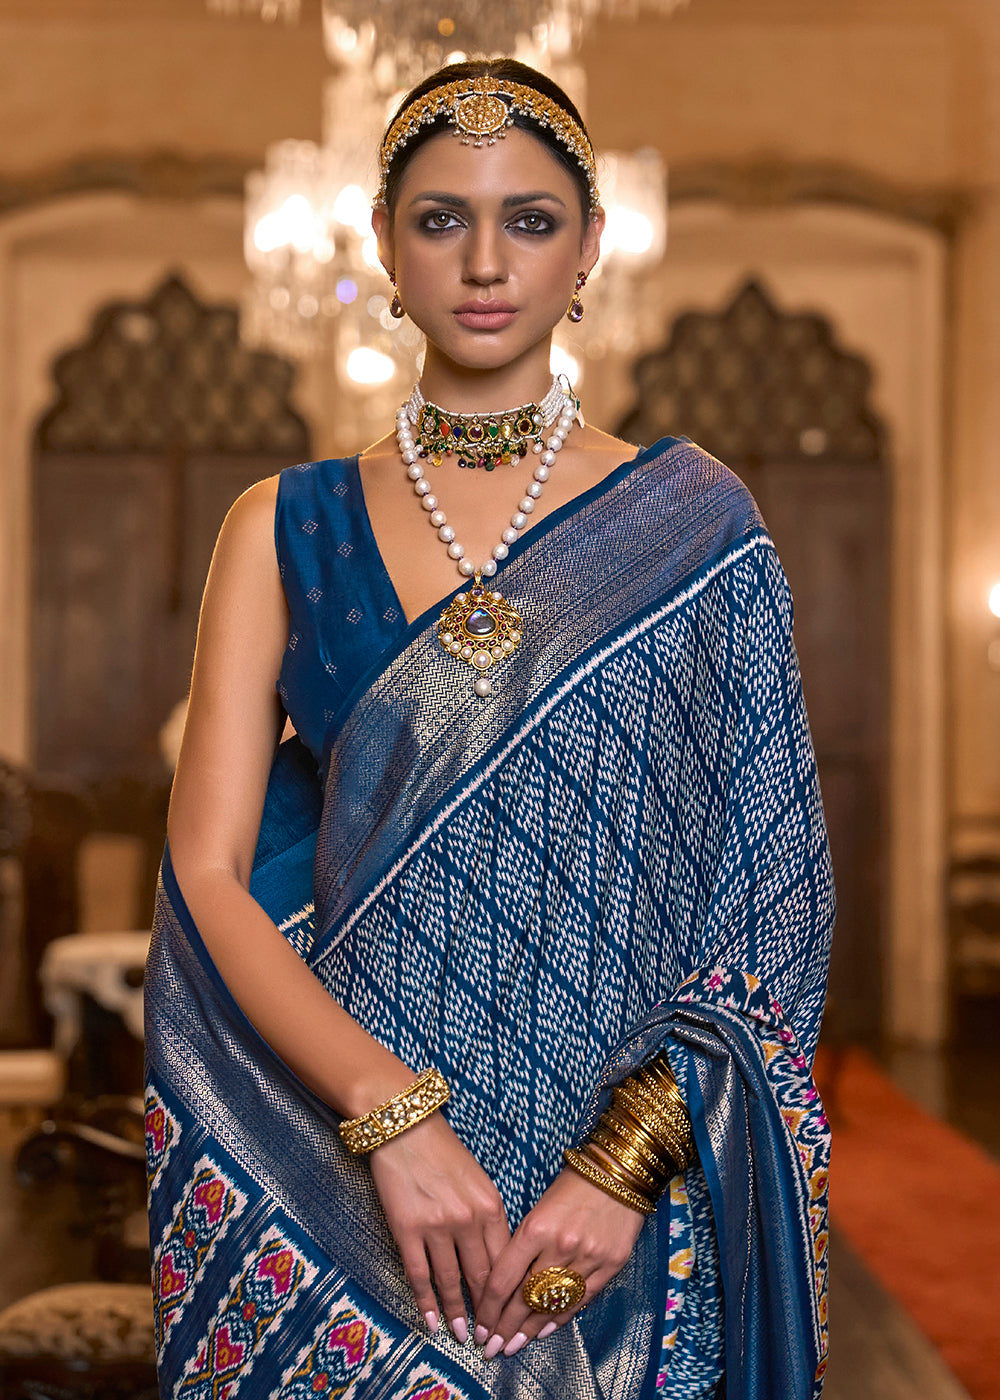 Shop Now Pretty Navy Blue Woven Zari & Printed Patola Silk Traditional Saree from Empress Clothing in USA, UK, Canada & Worldwide.